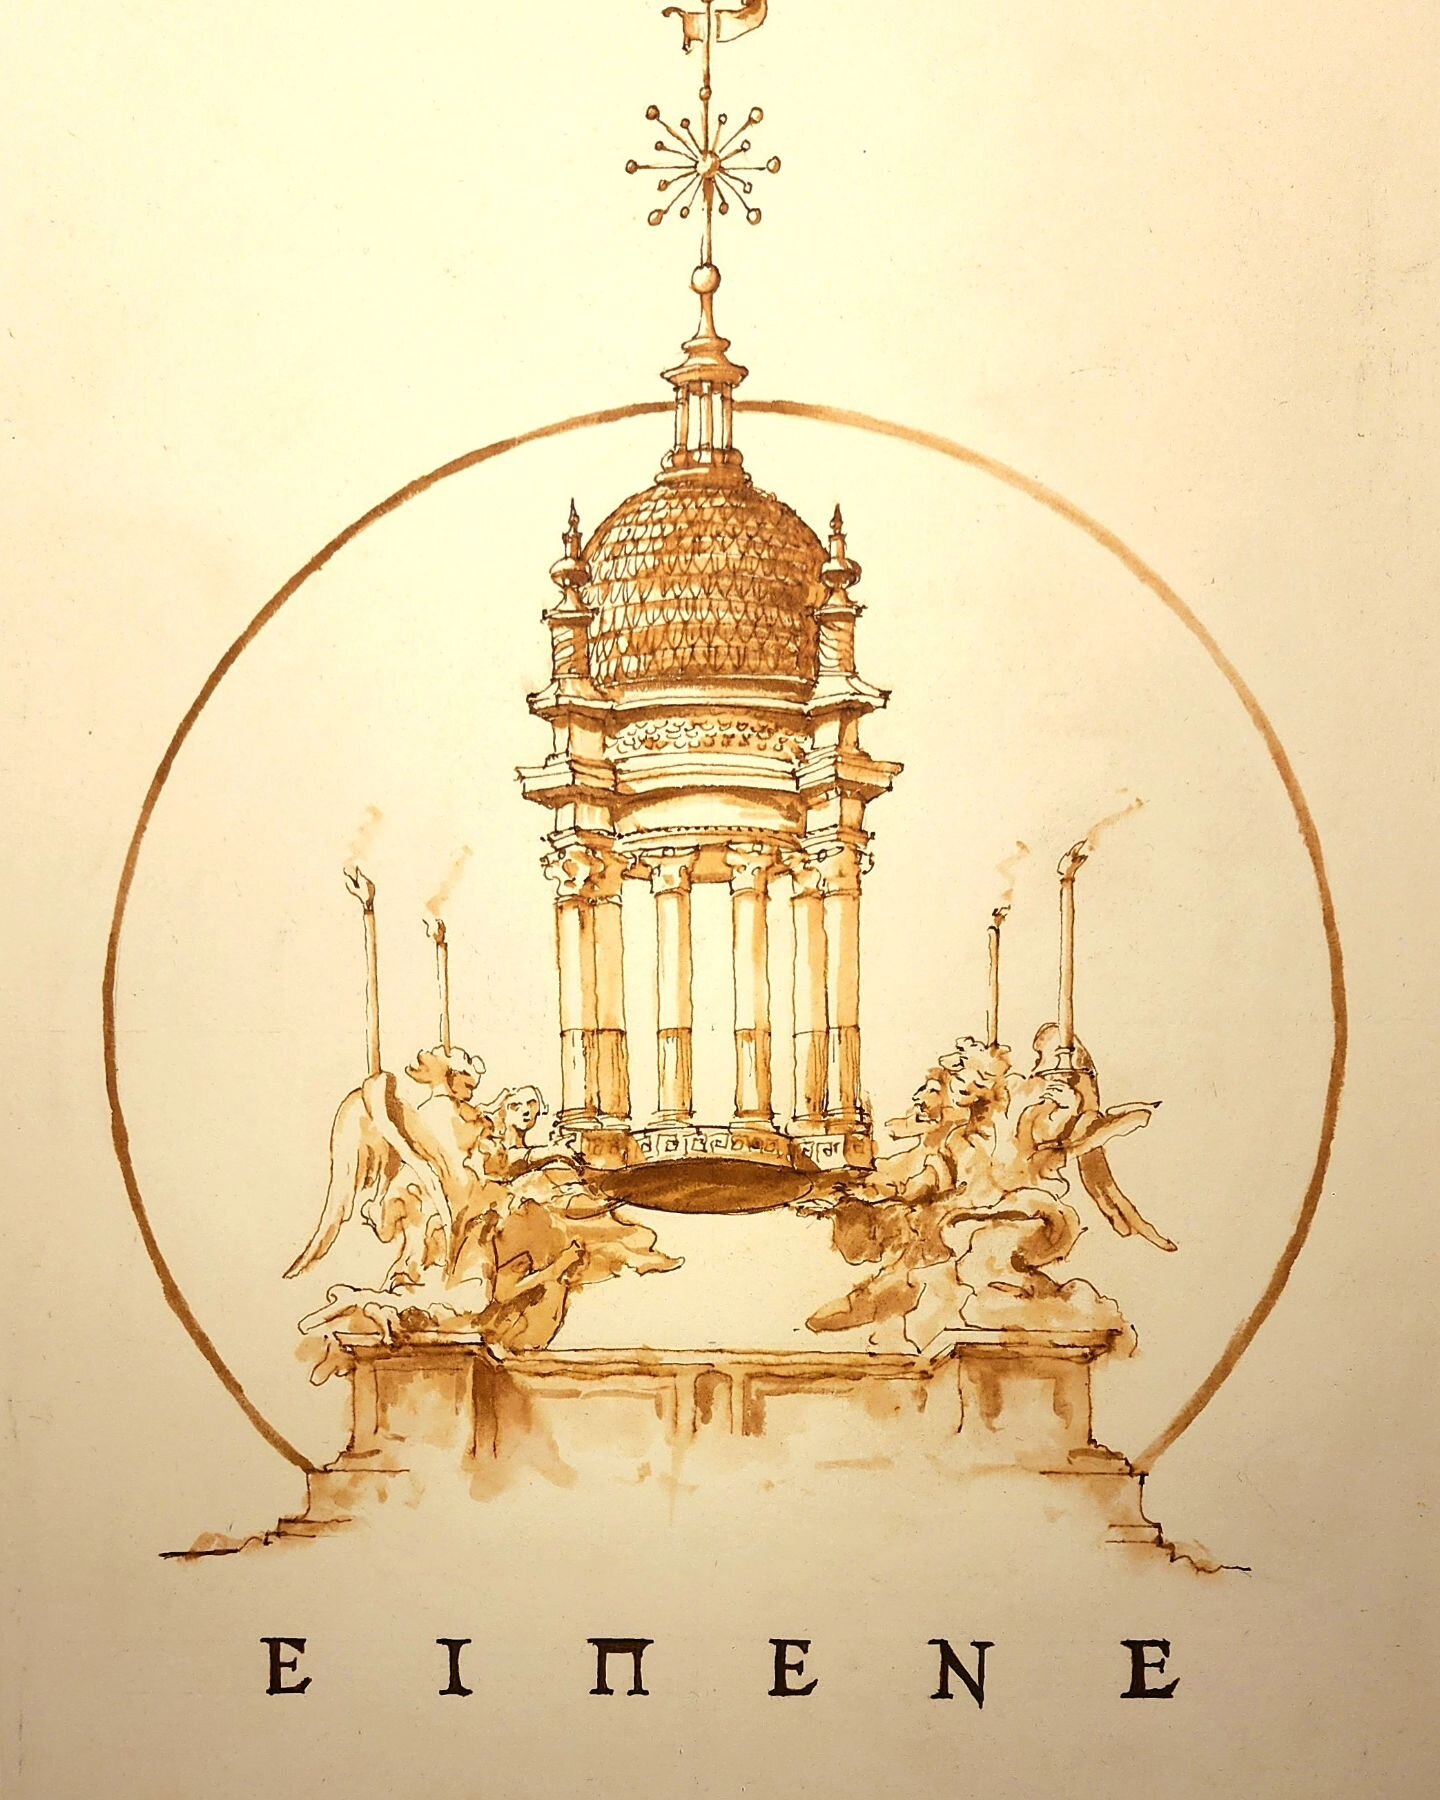 'EIRENE' (Peace) Capriccio after Bernini's sketch for the  chapel of the Blessed Sacrament in St. Peter's and a cupola from  Madison Square Garden by Stanford White. RWC Atelier 2023

&quot;Blessed are the peacemakers, for they will be called childre